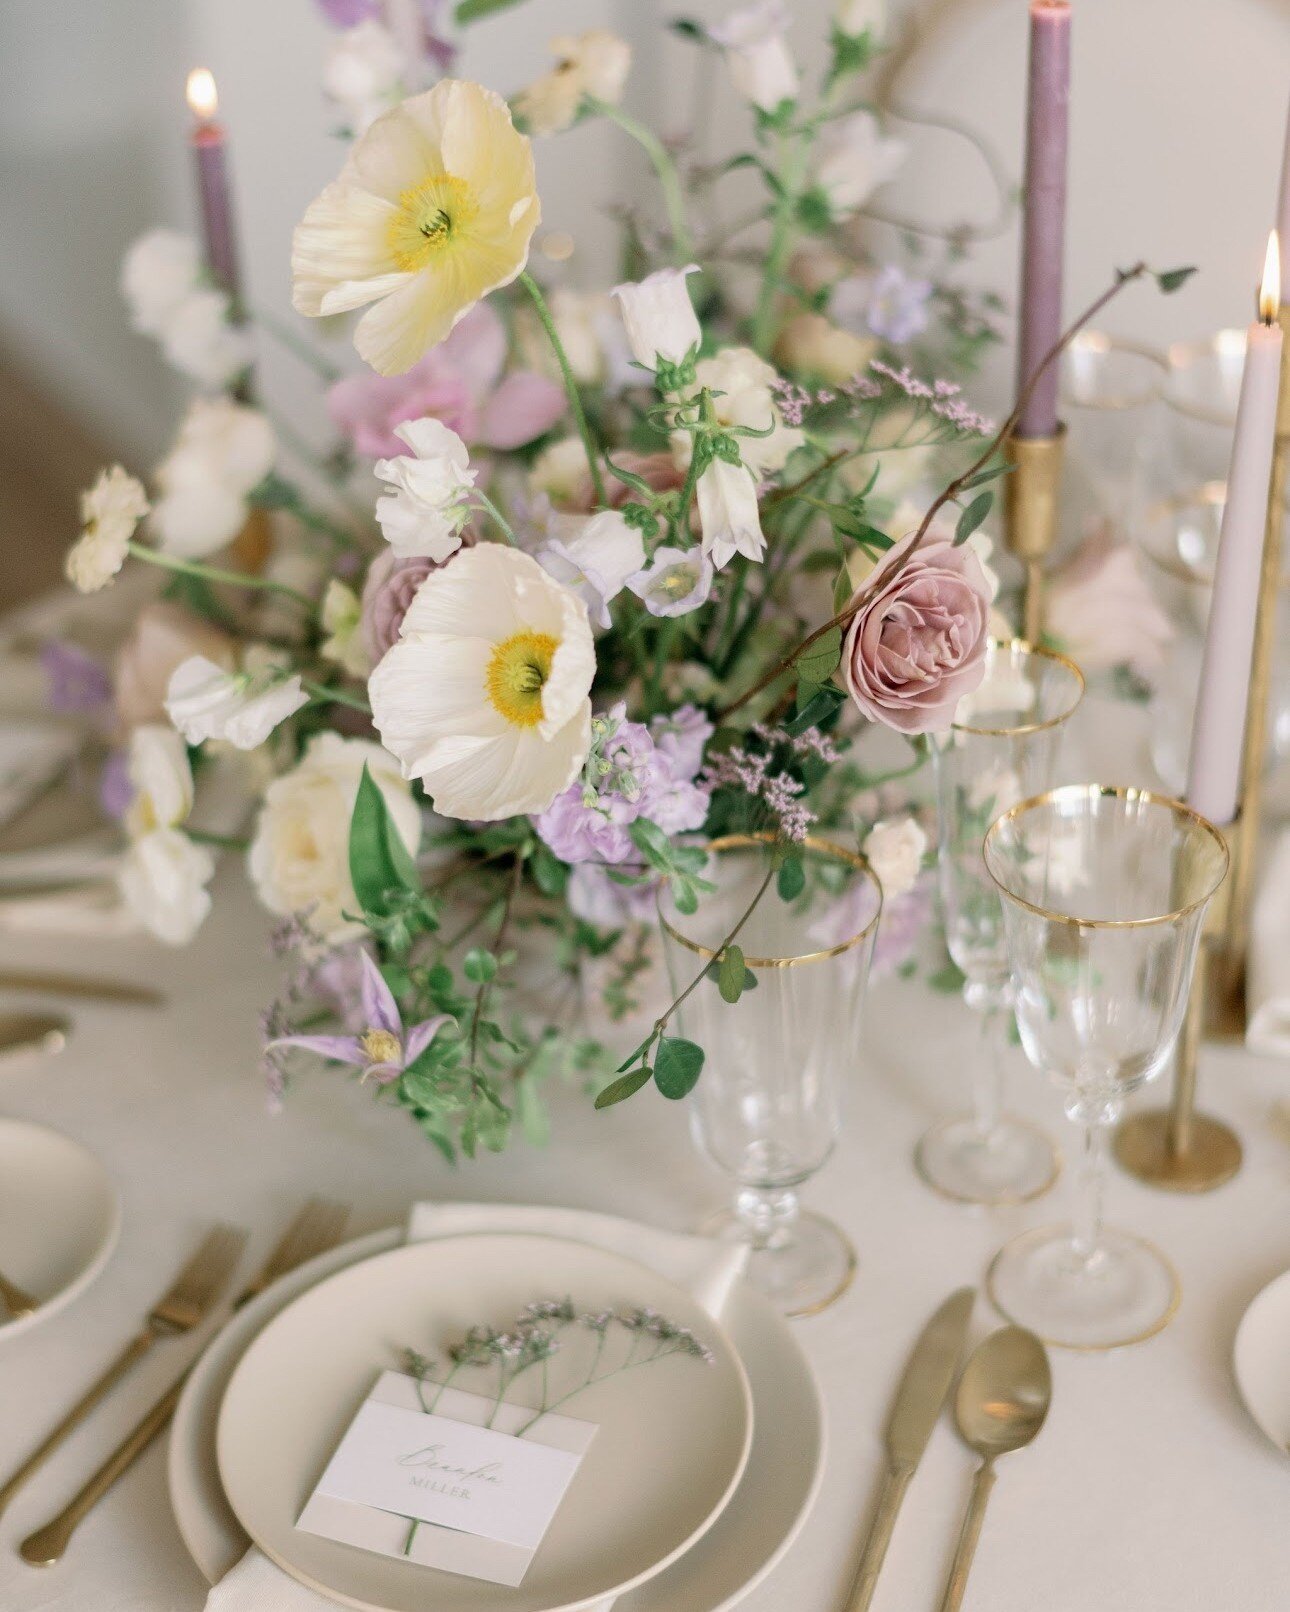 Hoppy Easter weekend, my friends! 🐣🤍🐰

Design + Styling: @lindsayplankevents
Photography: @emilyjean_photography 
Floral Design: @foreverwildfield 
Studio: @wildfieldstudio 
Tablescape Rentals: @tabletalesinc 
Stationery: @paperpalette